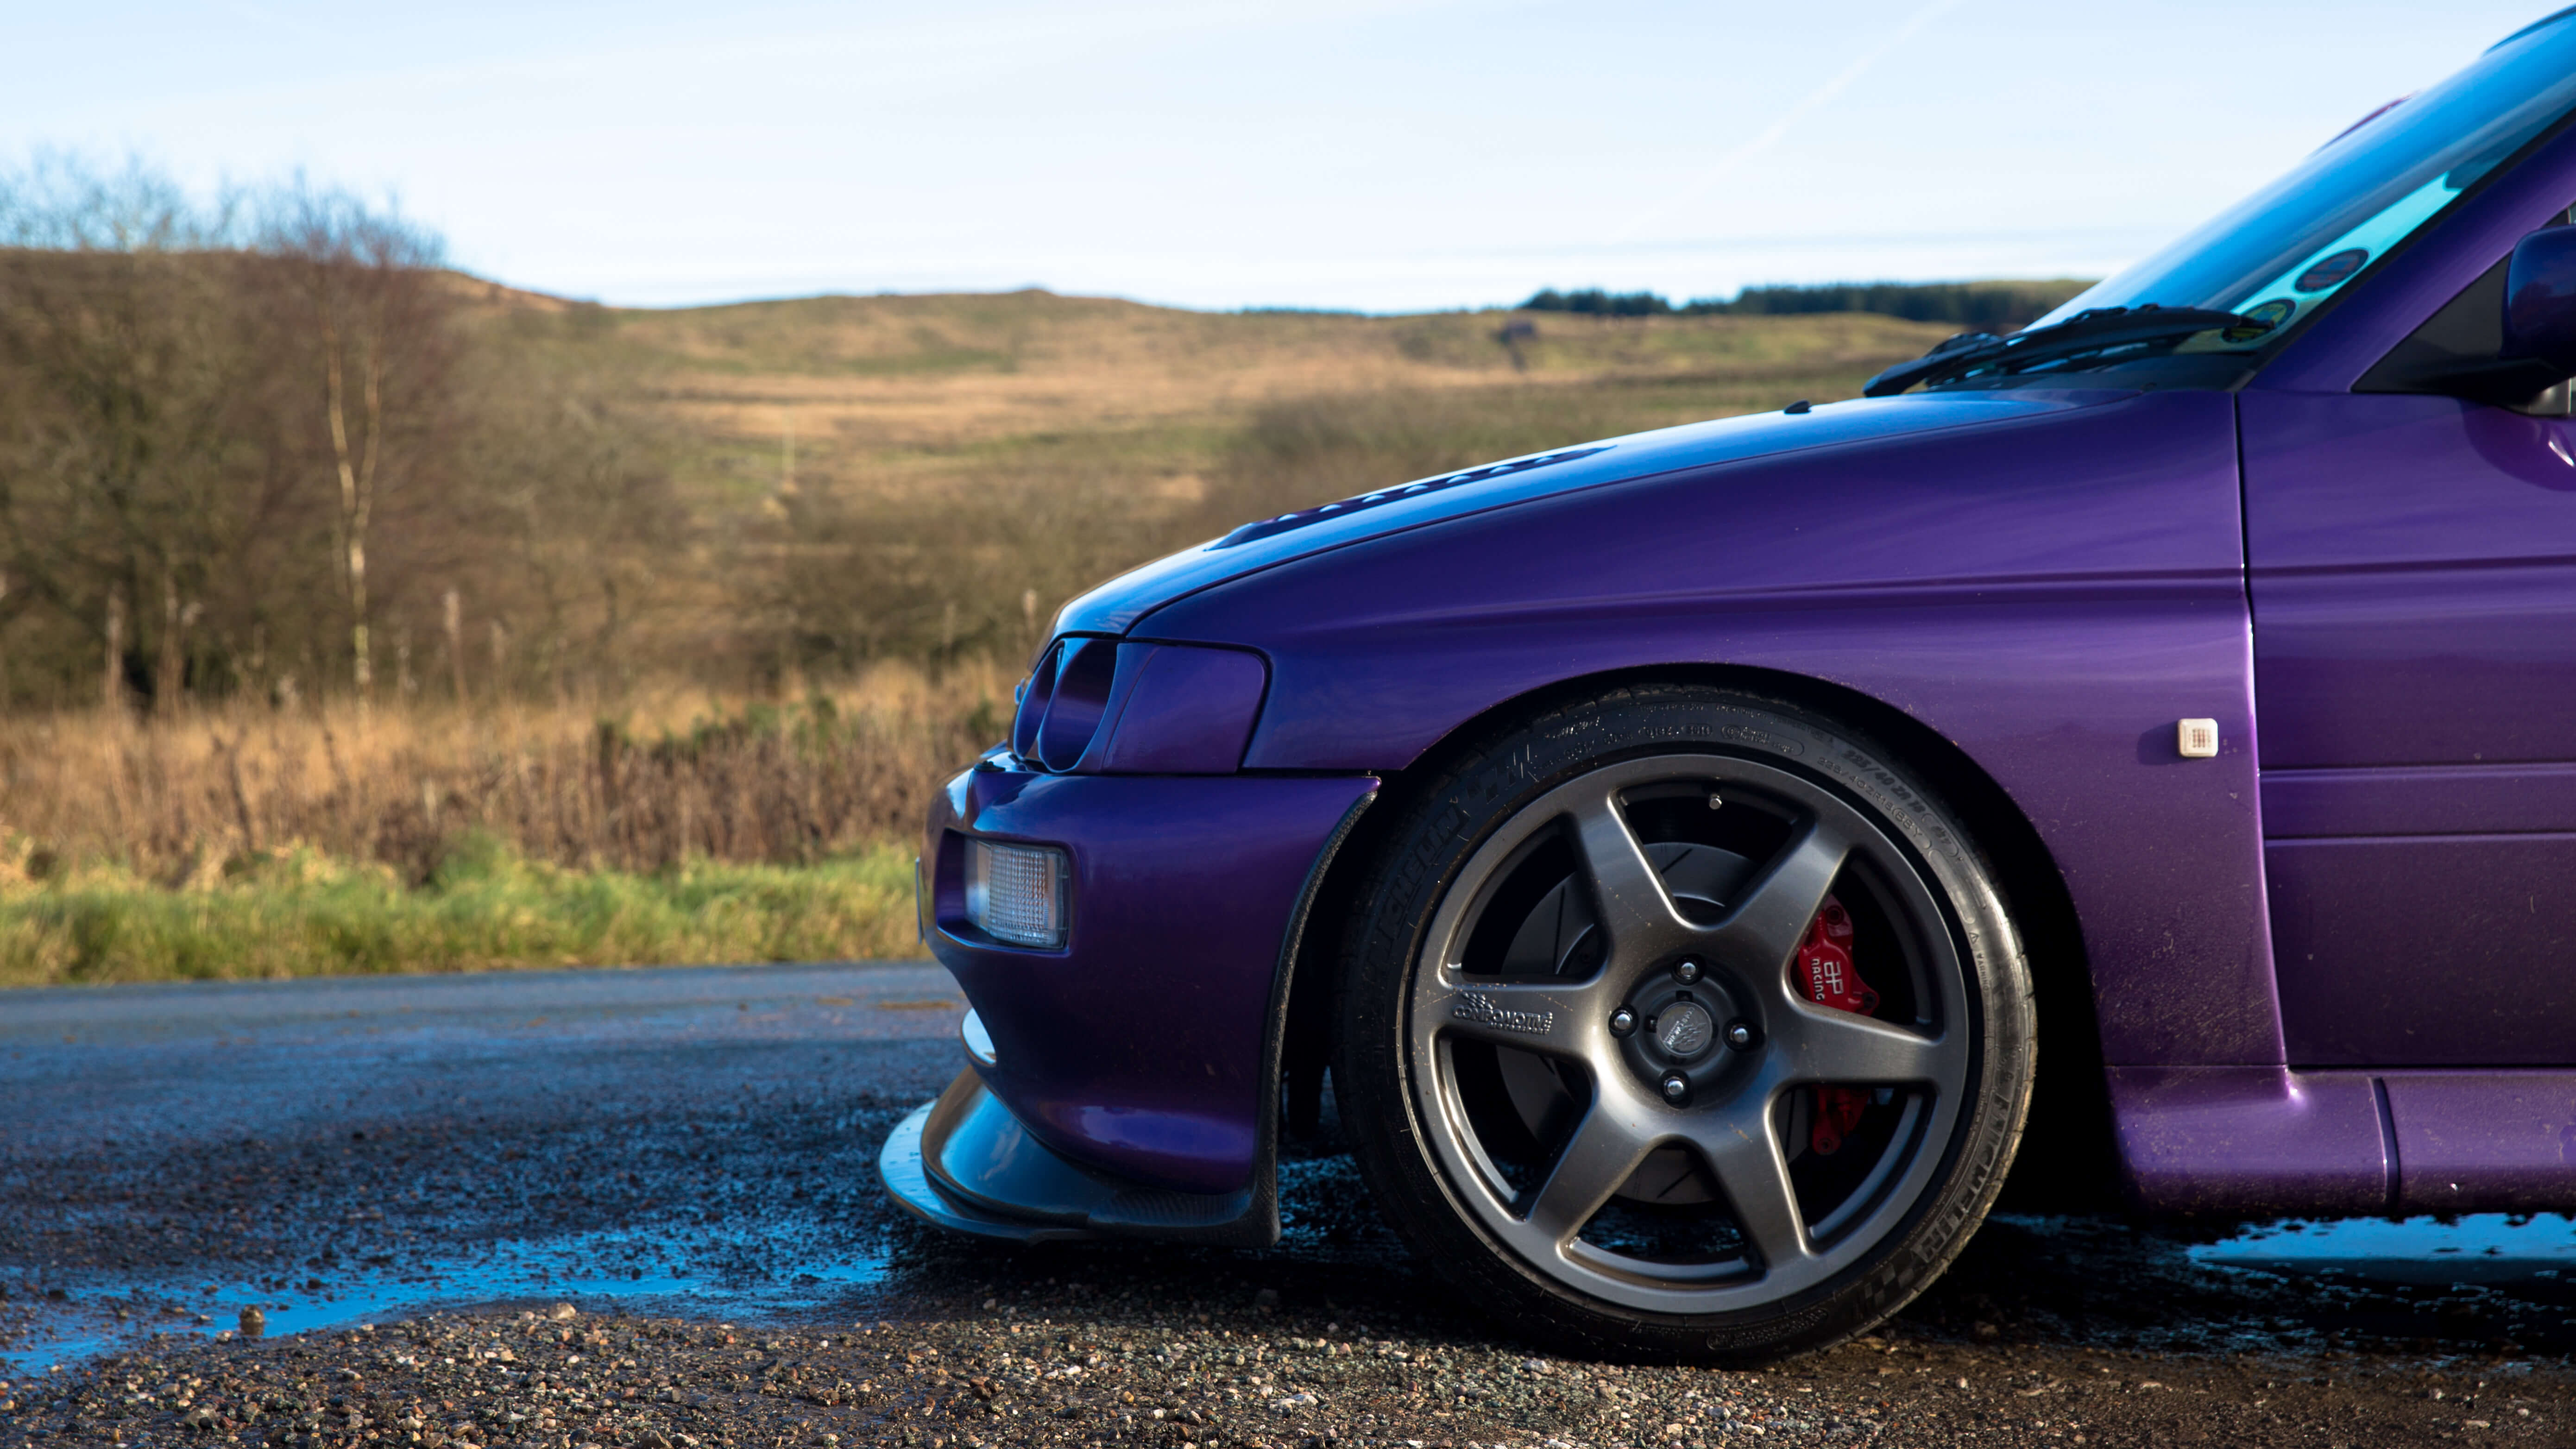 Front of purple Escort Cosworth with landscape in the background